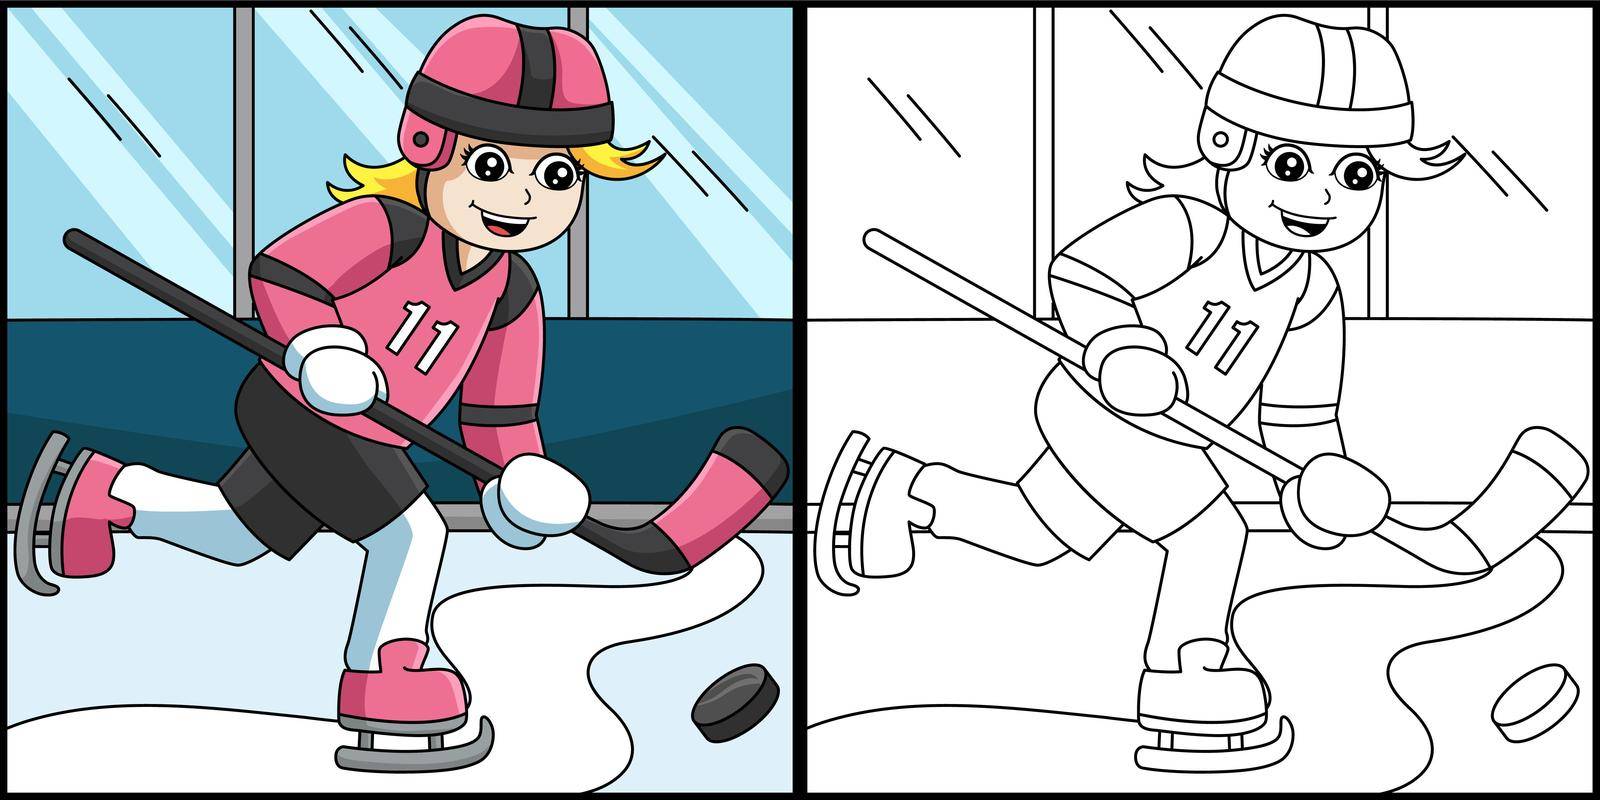 This coloring page shows a girl playing hockey. One side of this illustration is colored and serves as an inspiration for children.